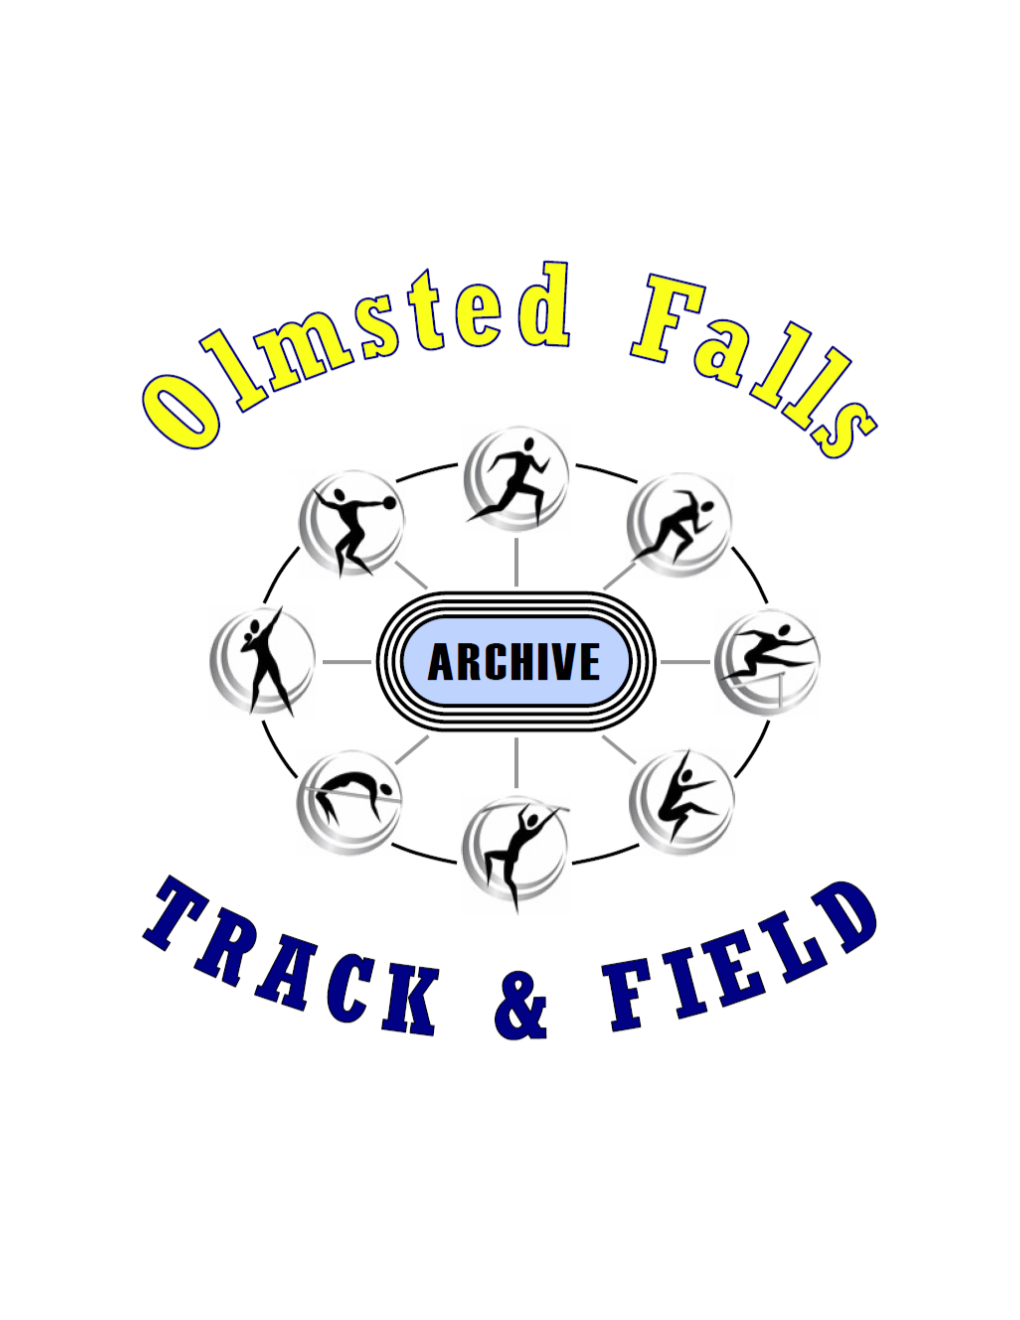 OFHS T & F Records